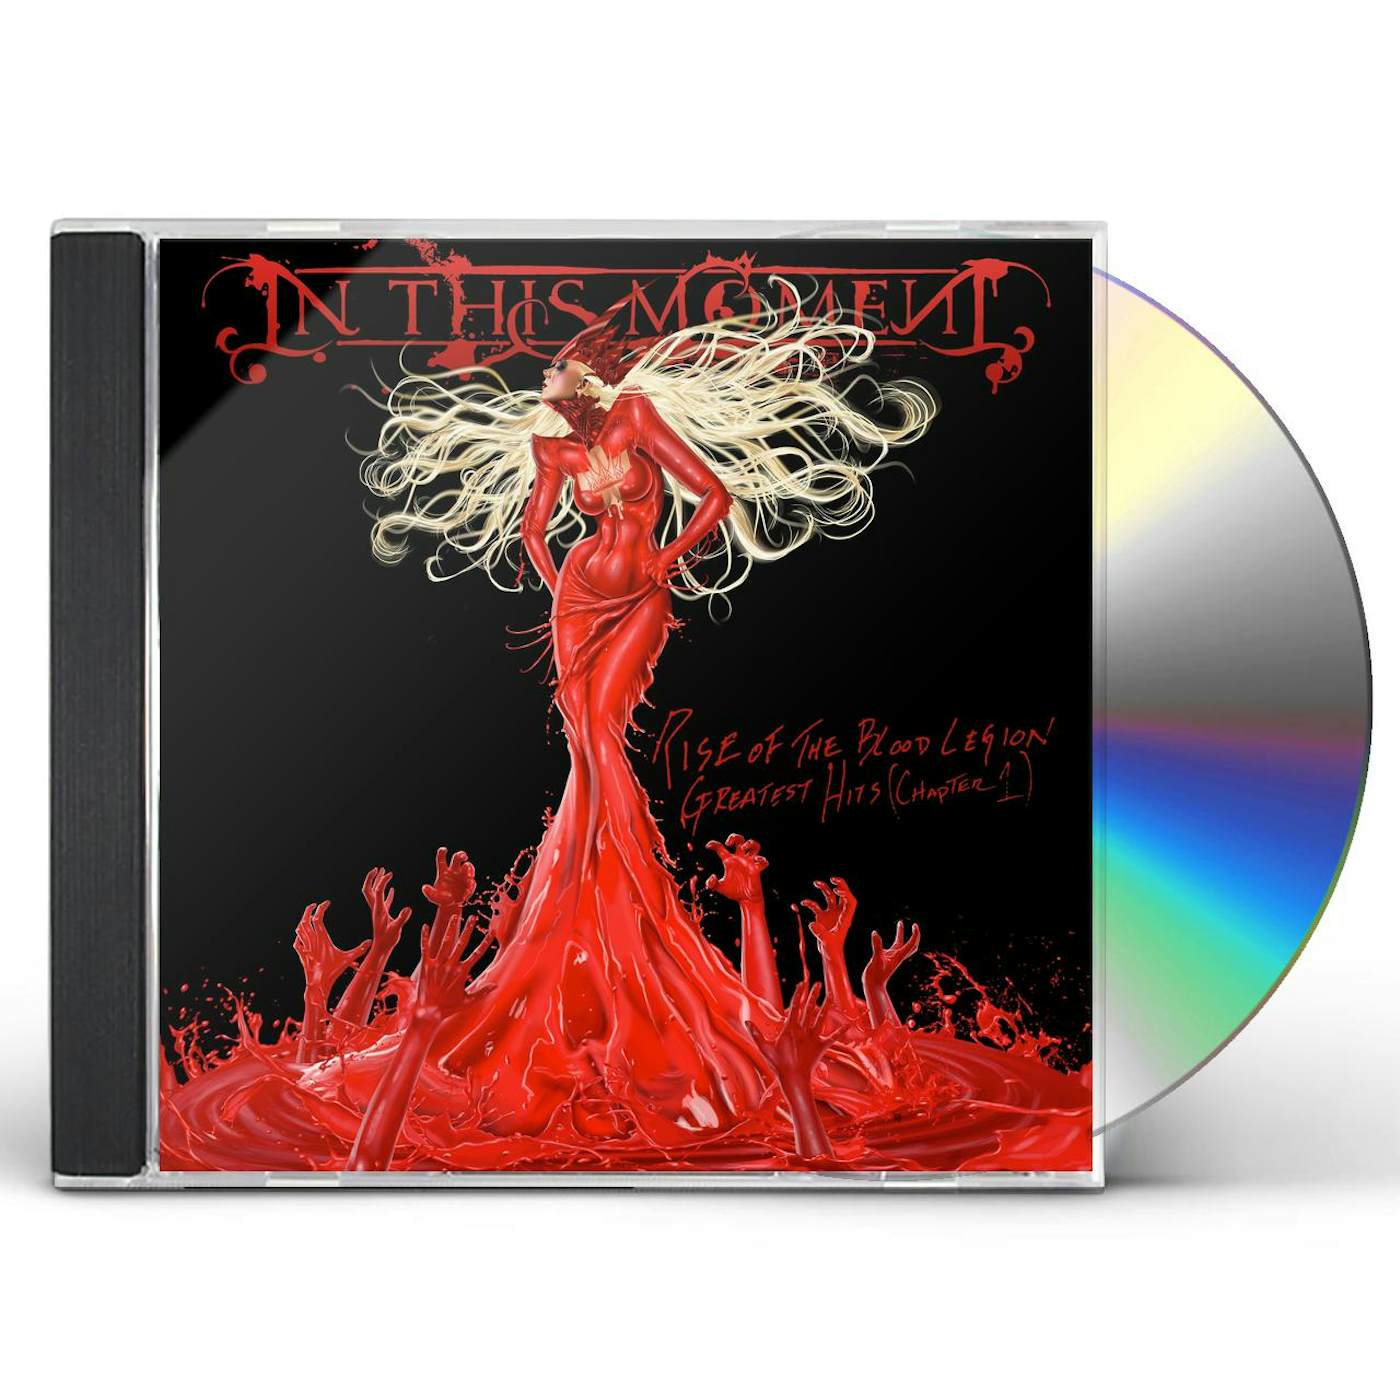 In This Moment RISE OF BLOOD LEGION: GREATEST HITS (CHAPTER 1) CD